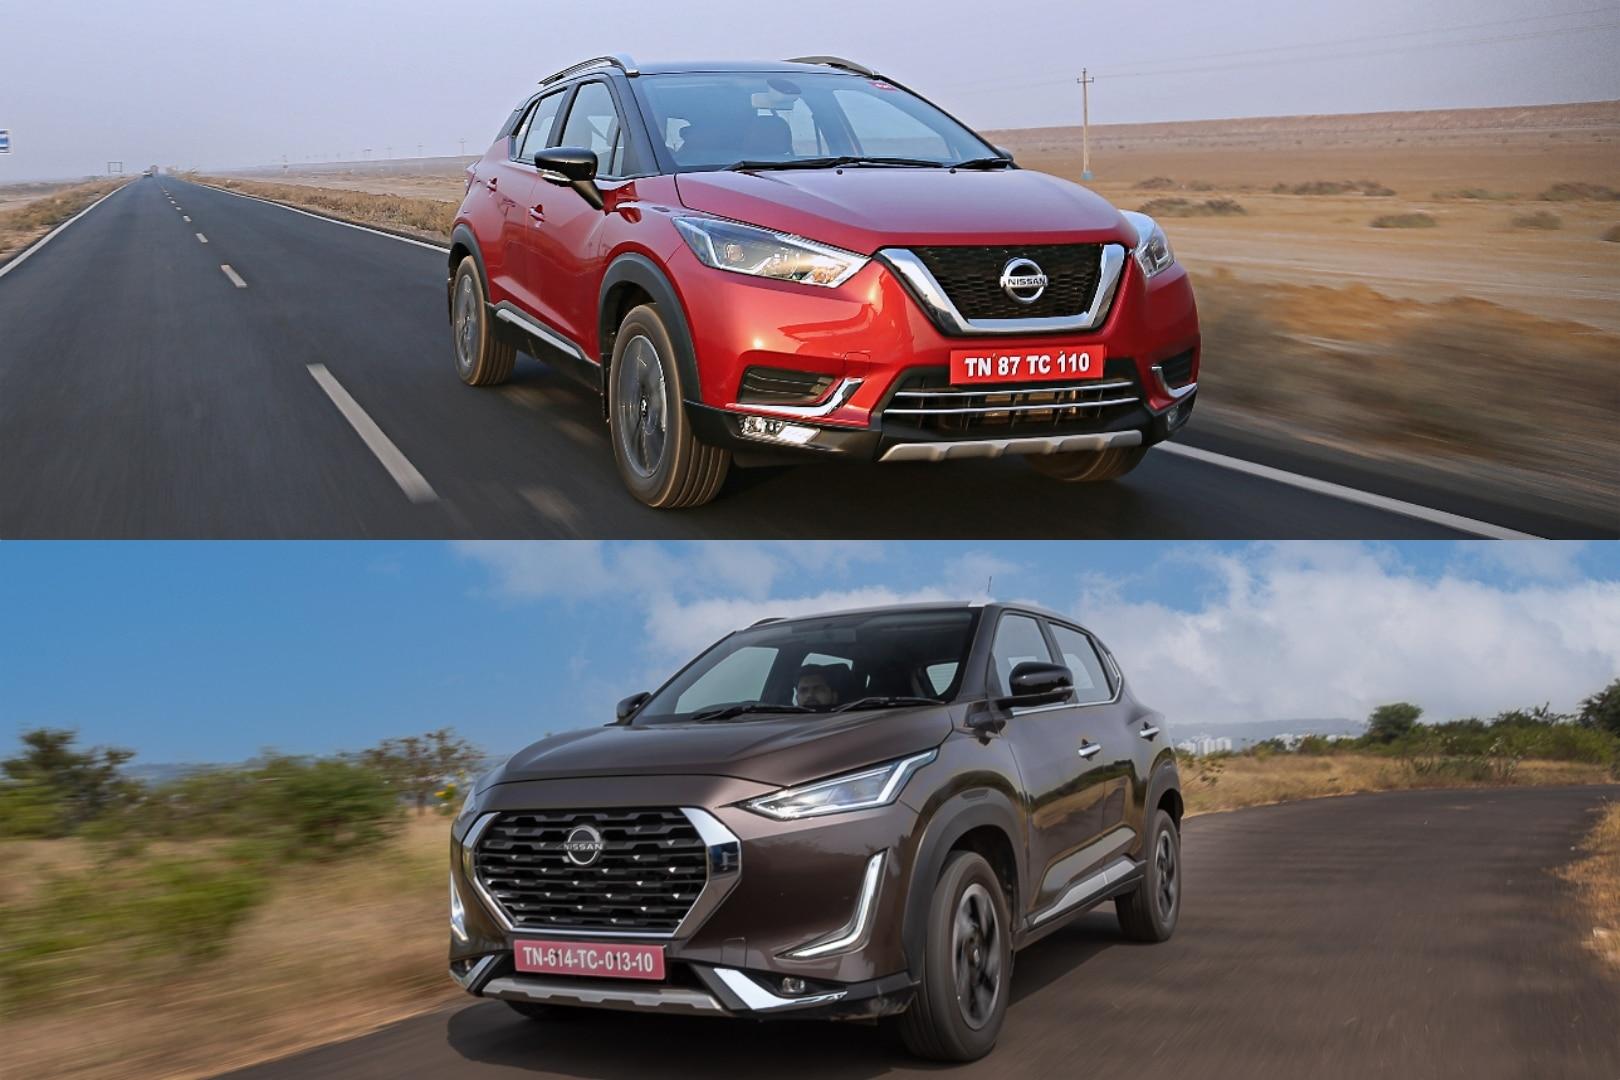 Grab Deals Worth Over Rs 90,000 On Nissan SUVs This March